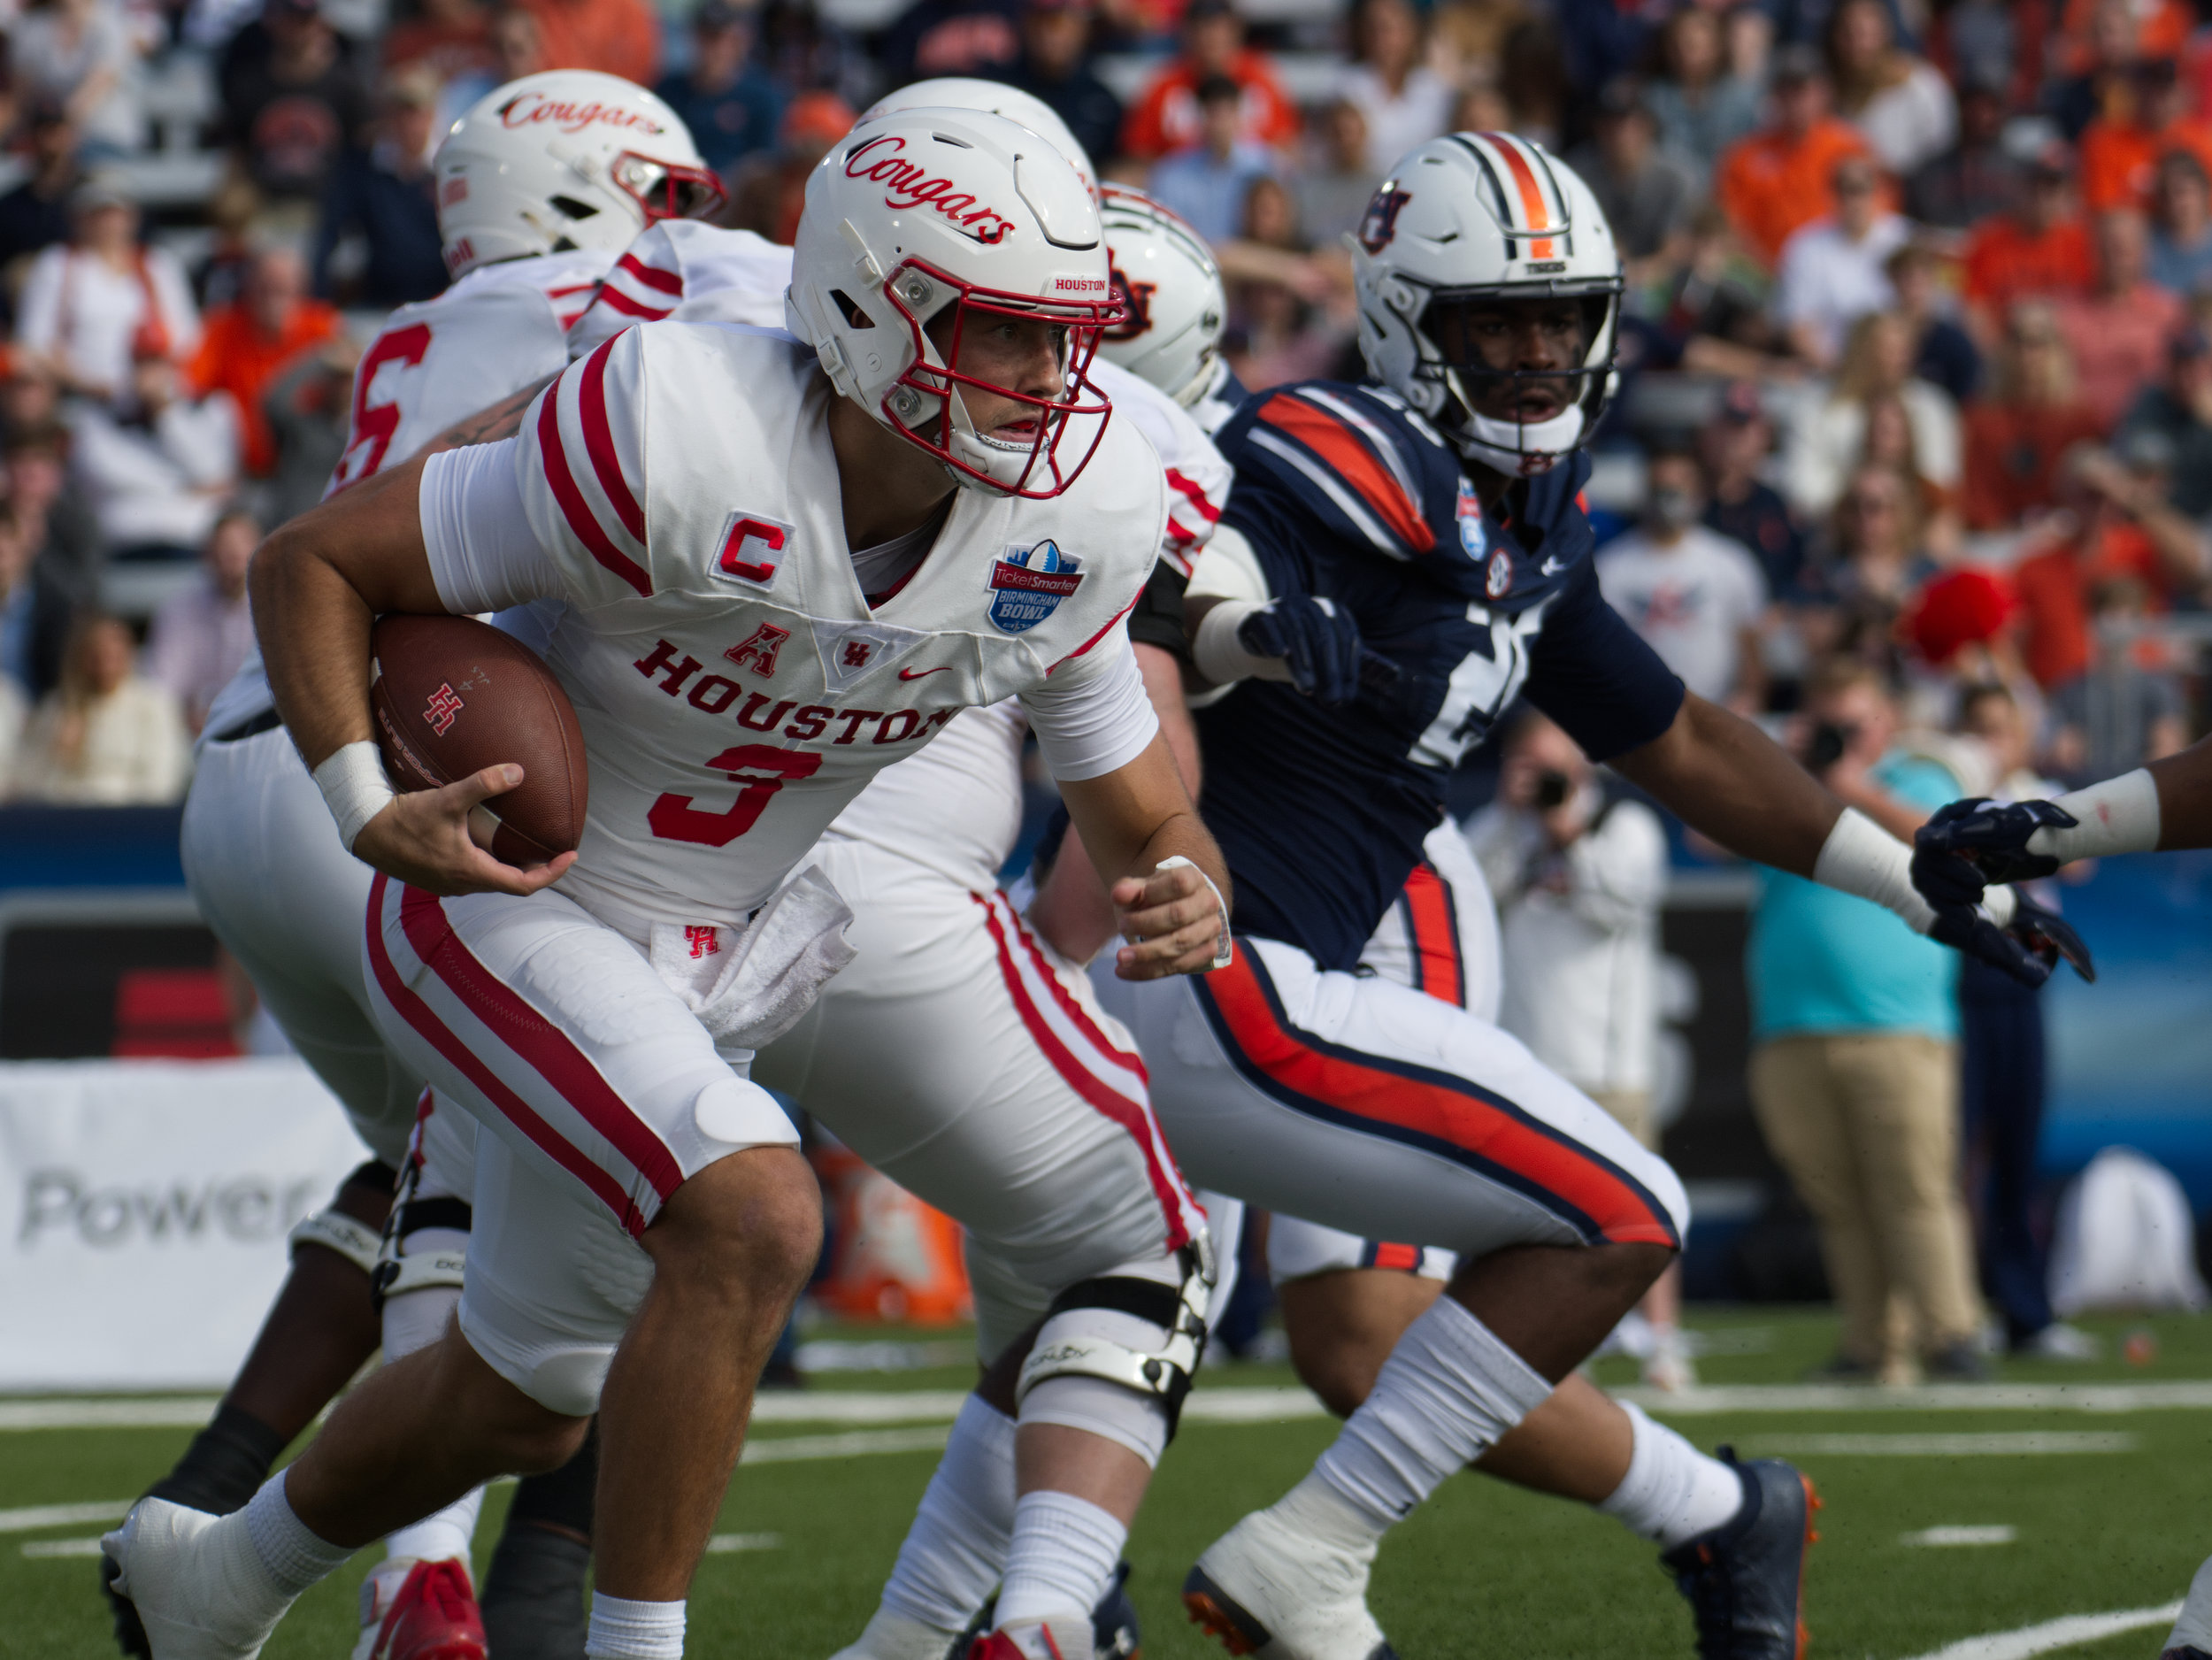  Clayton Tune's legs played a big part in UH's Birmingham Bowl victory over Auburn on Tuesday afternoon at Protective Stadium. | Steven Paultanis/The Cougar 